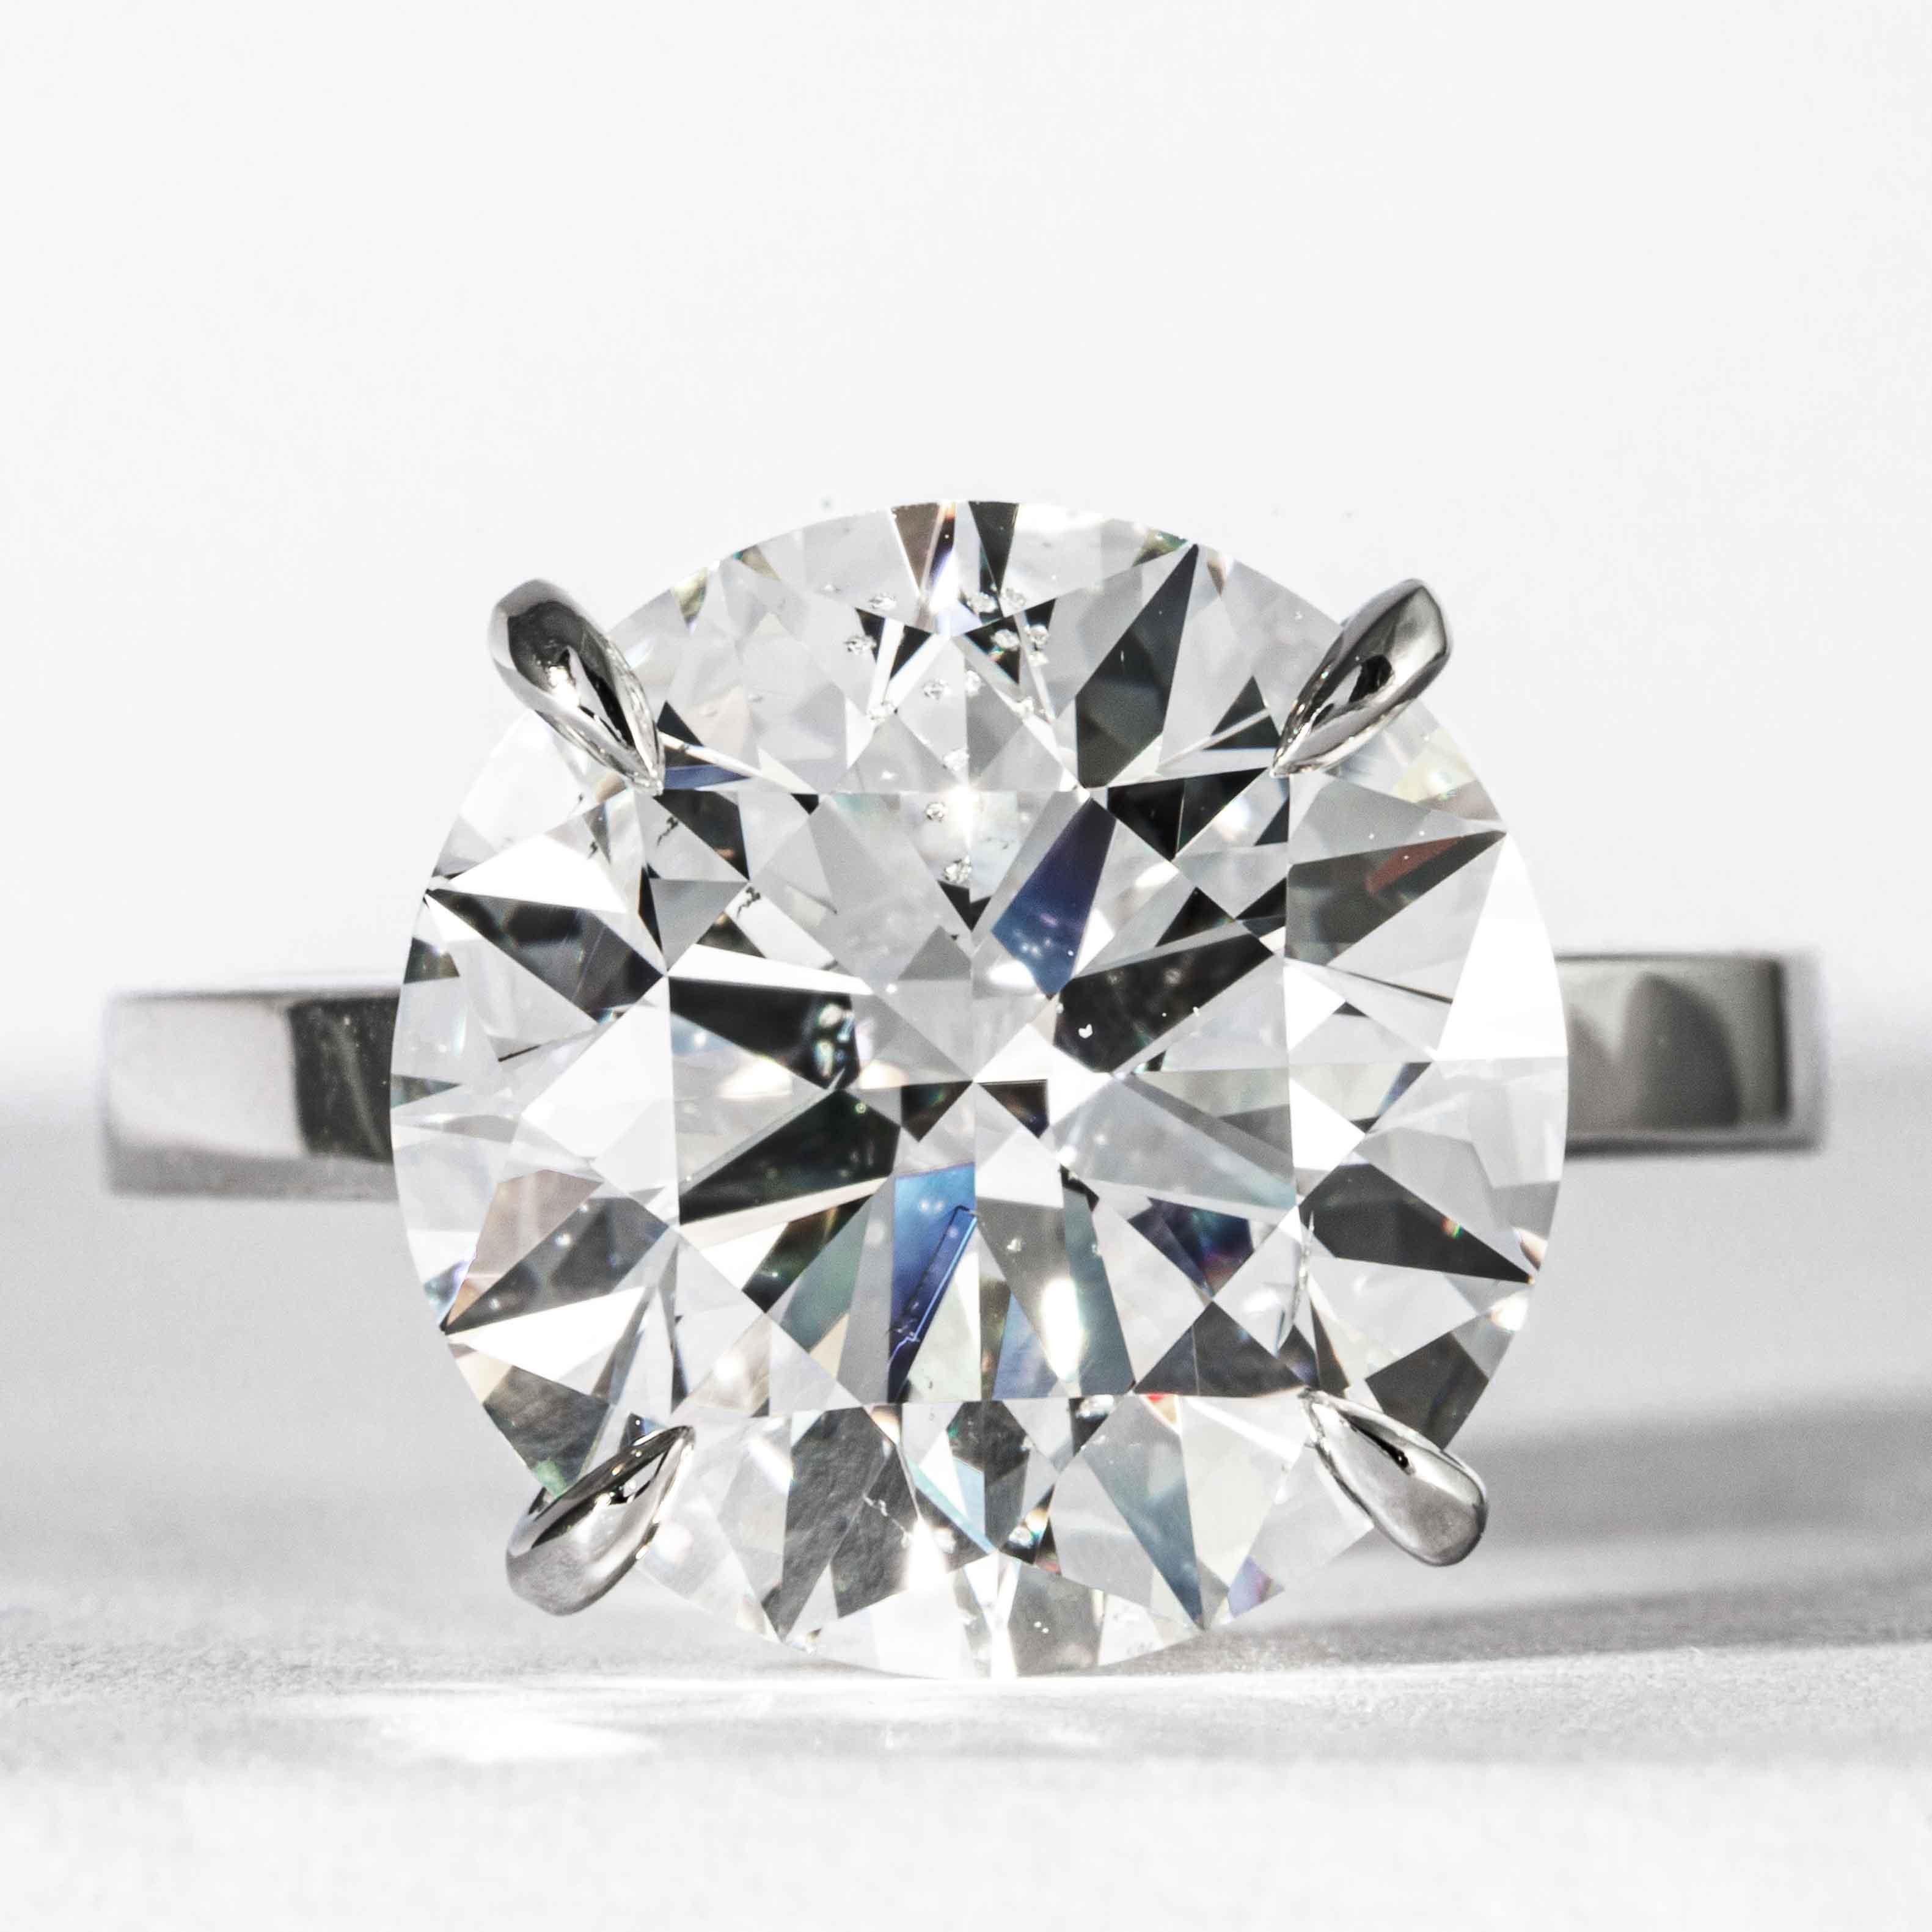 This diamond solitaire ring is offered by Shreve, Crump & Low. This 8.04 carat GIA certified F SI2 round brilliant cut diamond measuring 12.78 - 12.83 x 7.91mm is custom set in a handcrafted Shreve, Crump & Low platinum ring.  The 8,04 carat round